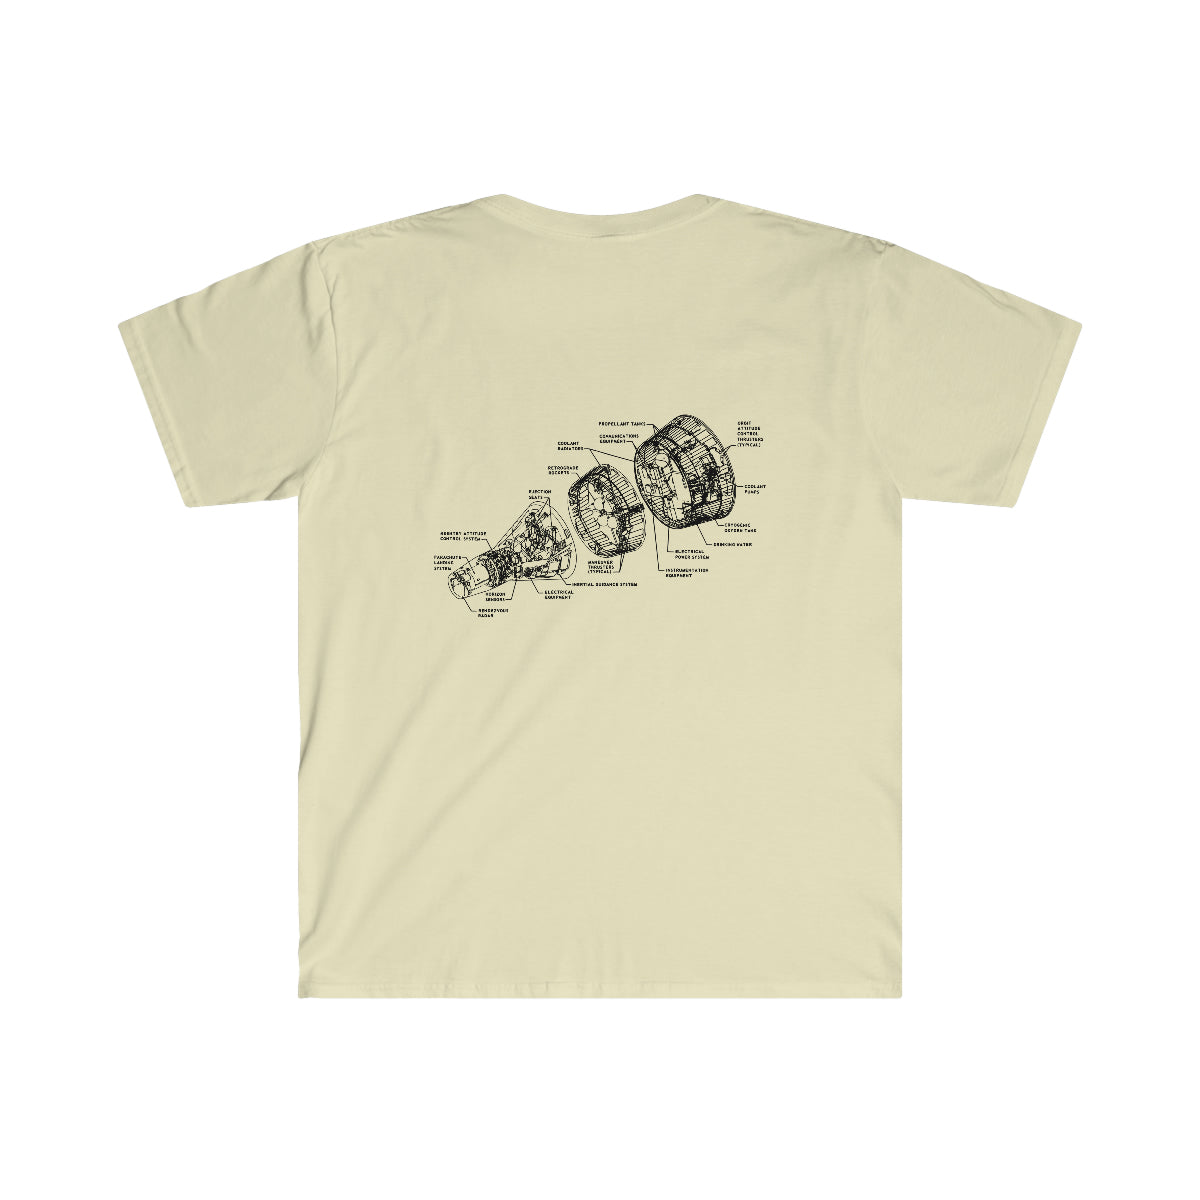 A beige Stages of Landing T-Shirt with a print of a gear available in various sizes.